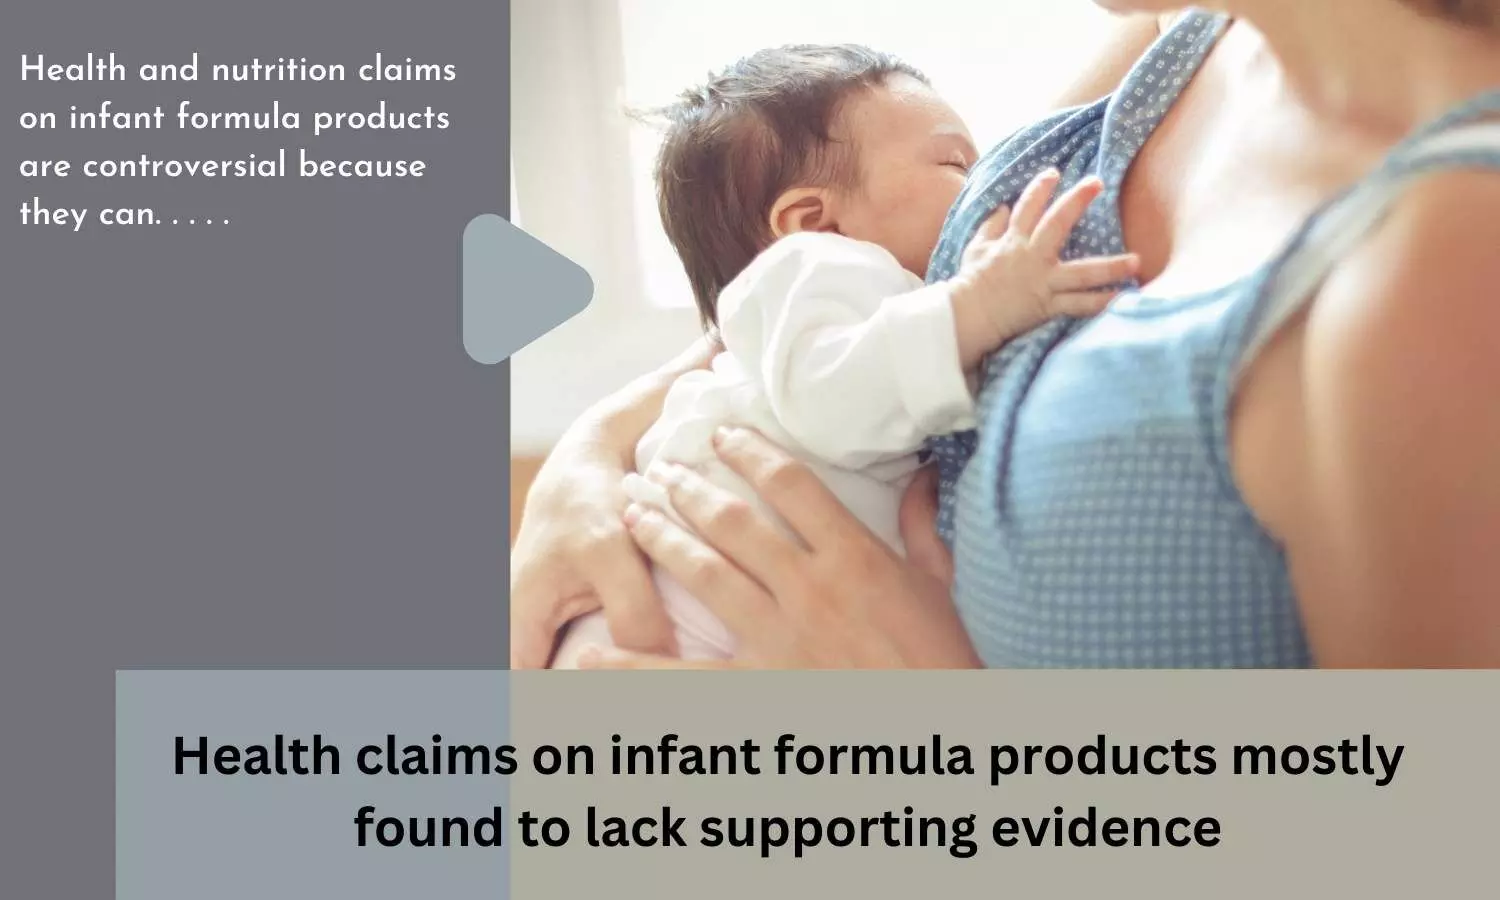 Health claims on infant formula products mostly found to lack supporting evidence